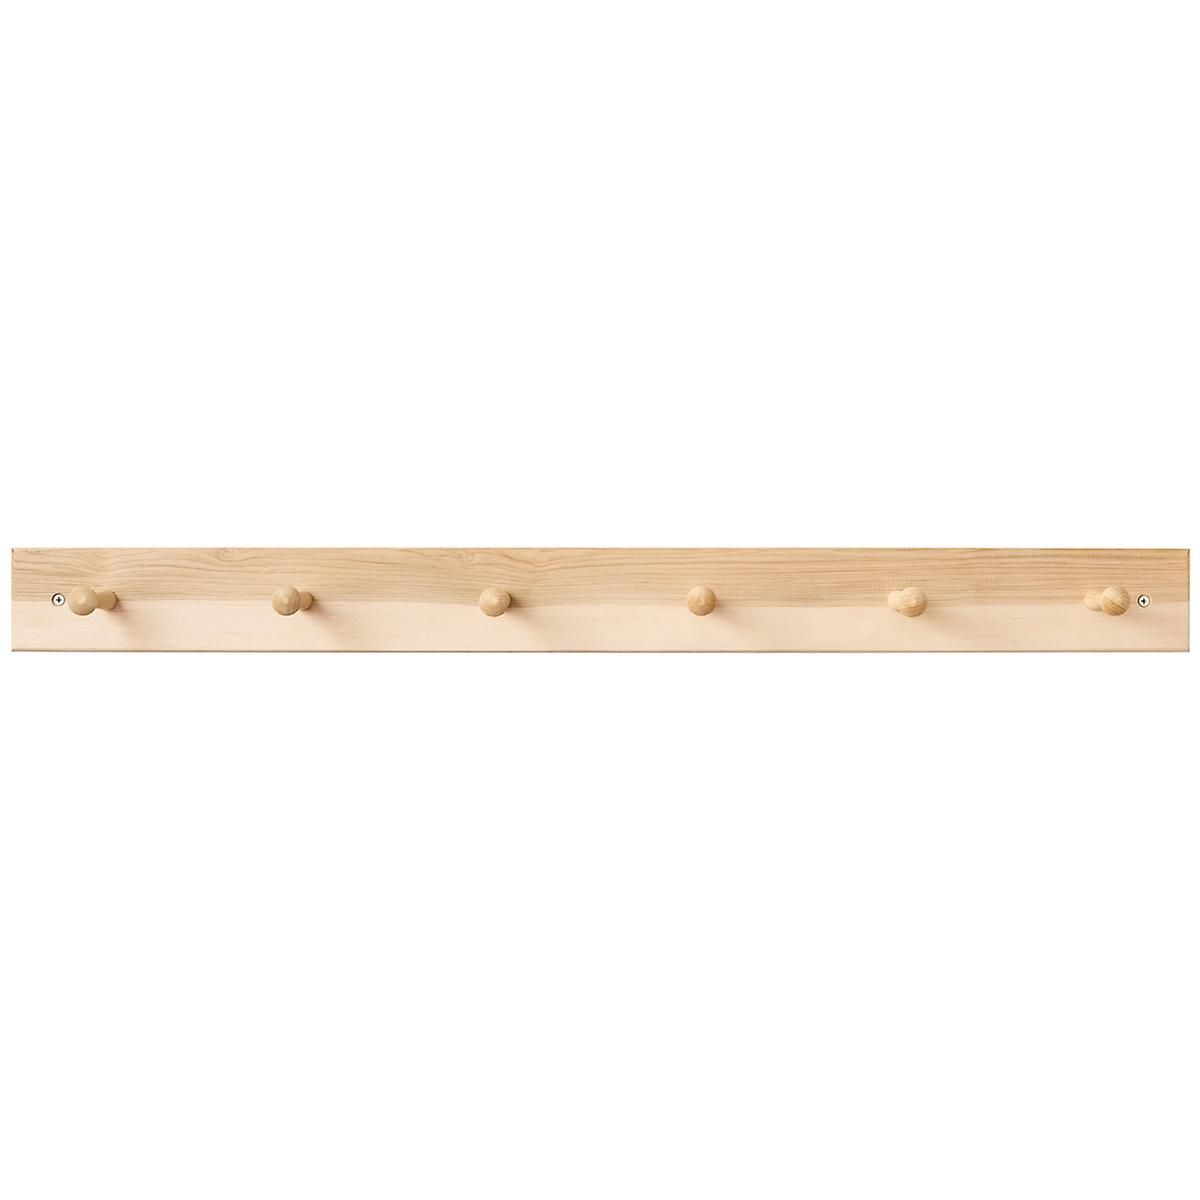 Maple Shaker Peg Racks | The Container Store